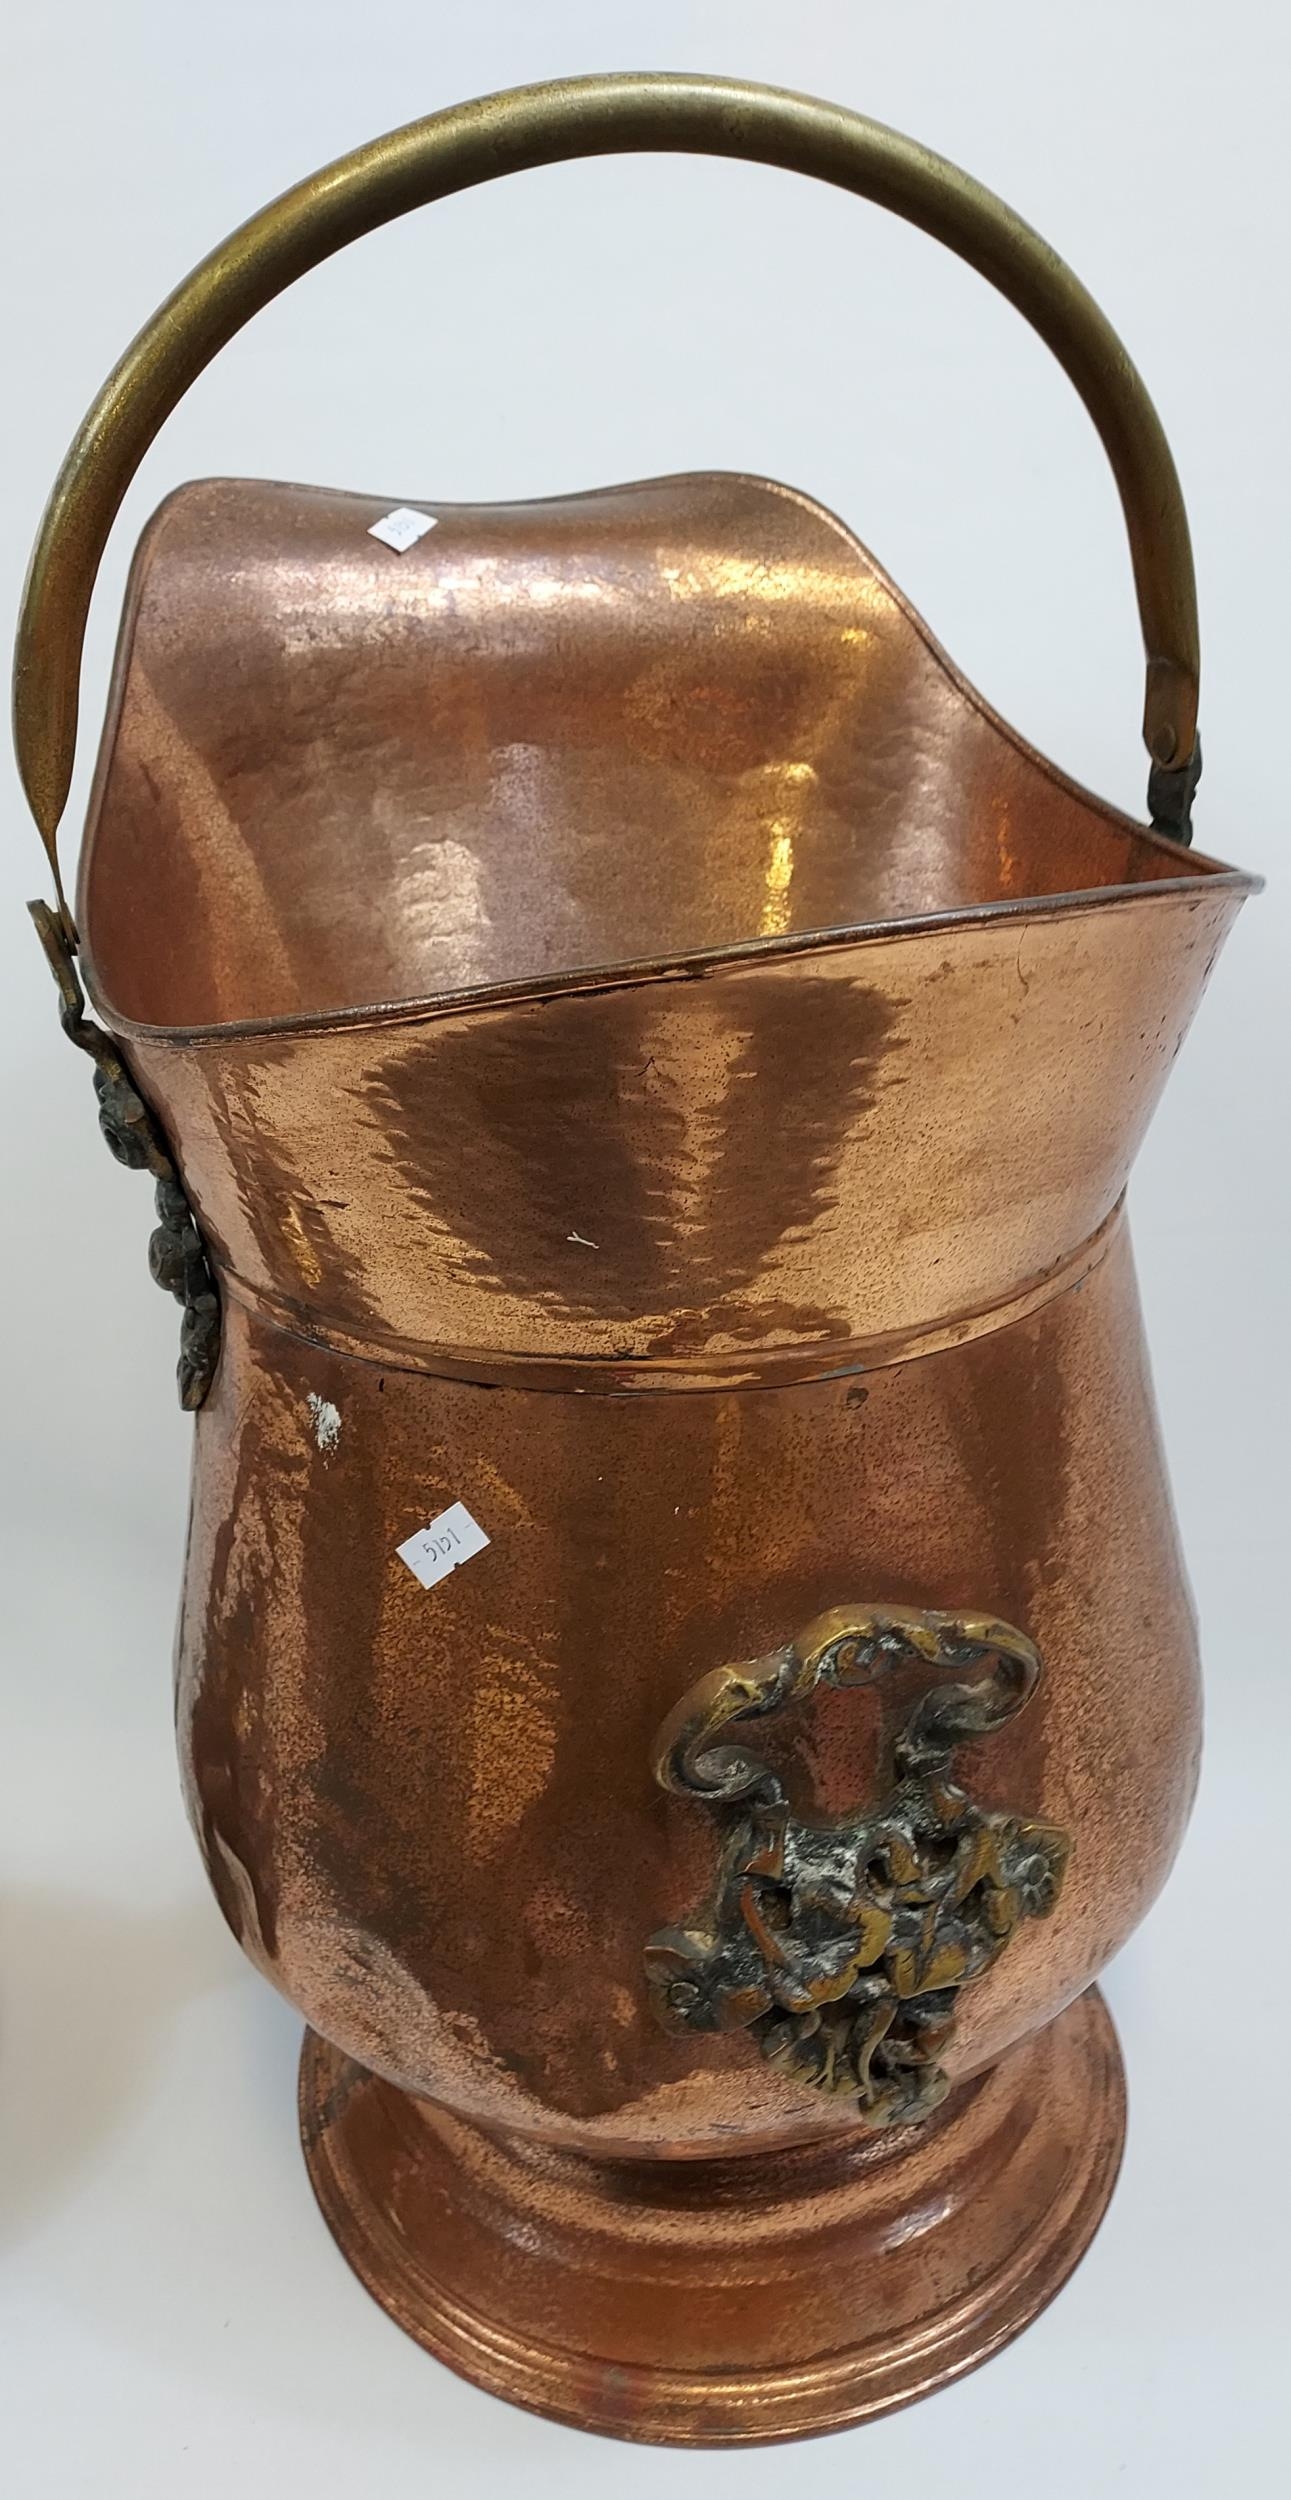 A Vintage brass and copper coal scuttle and Susteas stove top whistling tea kettle. - Image 2 of 2